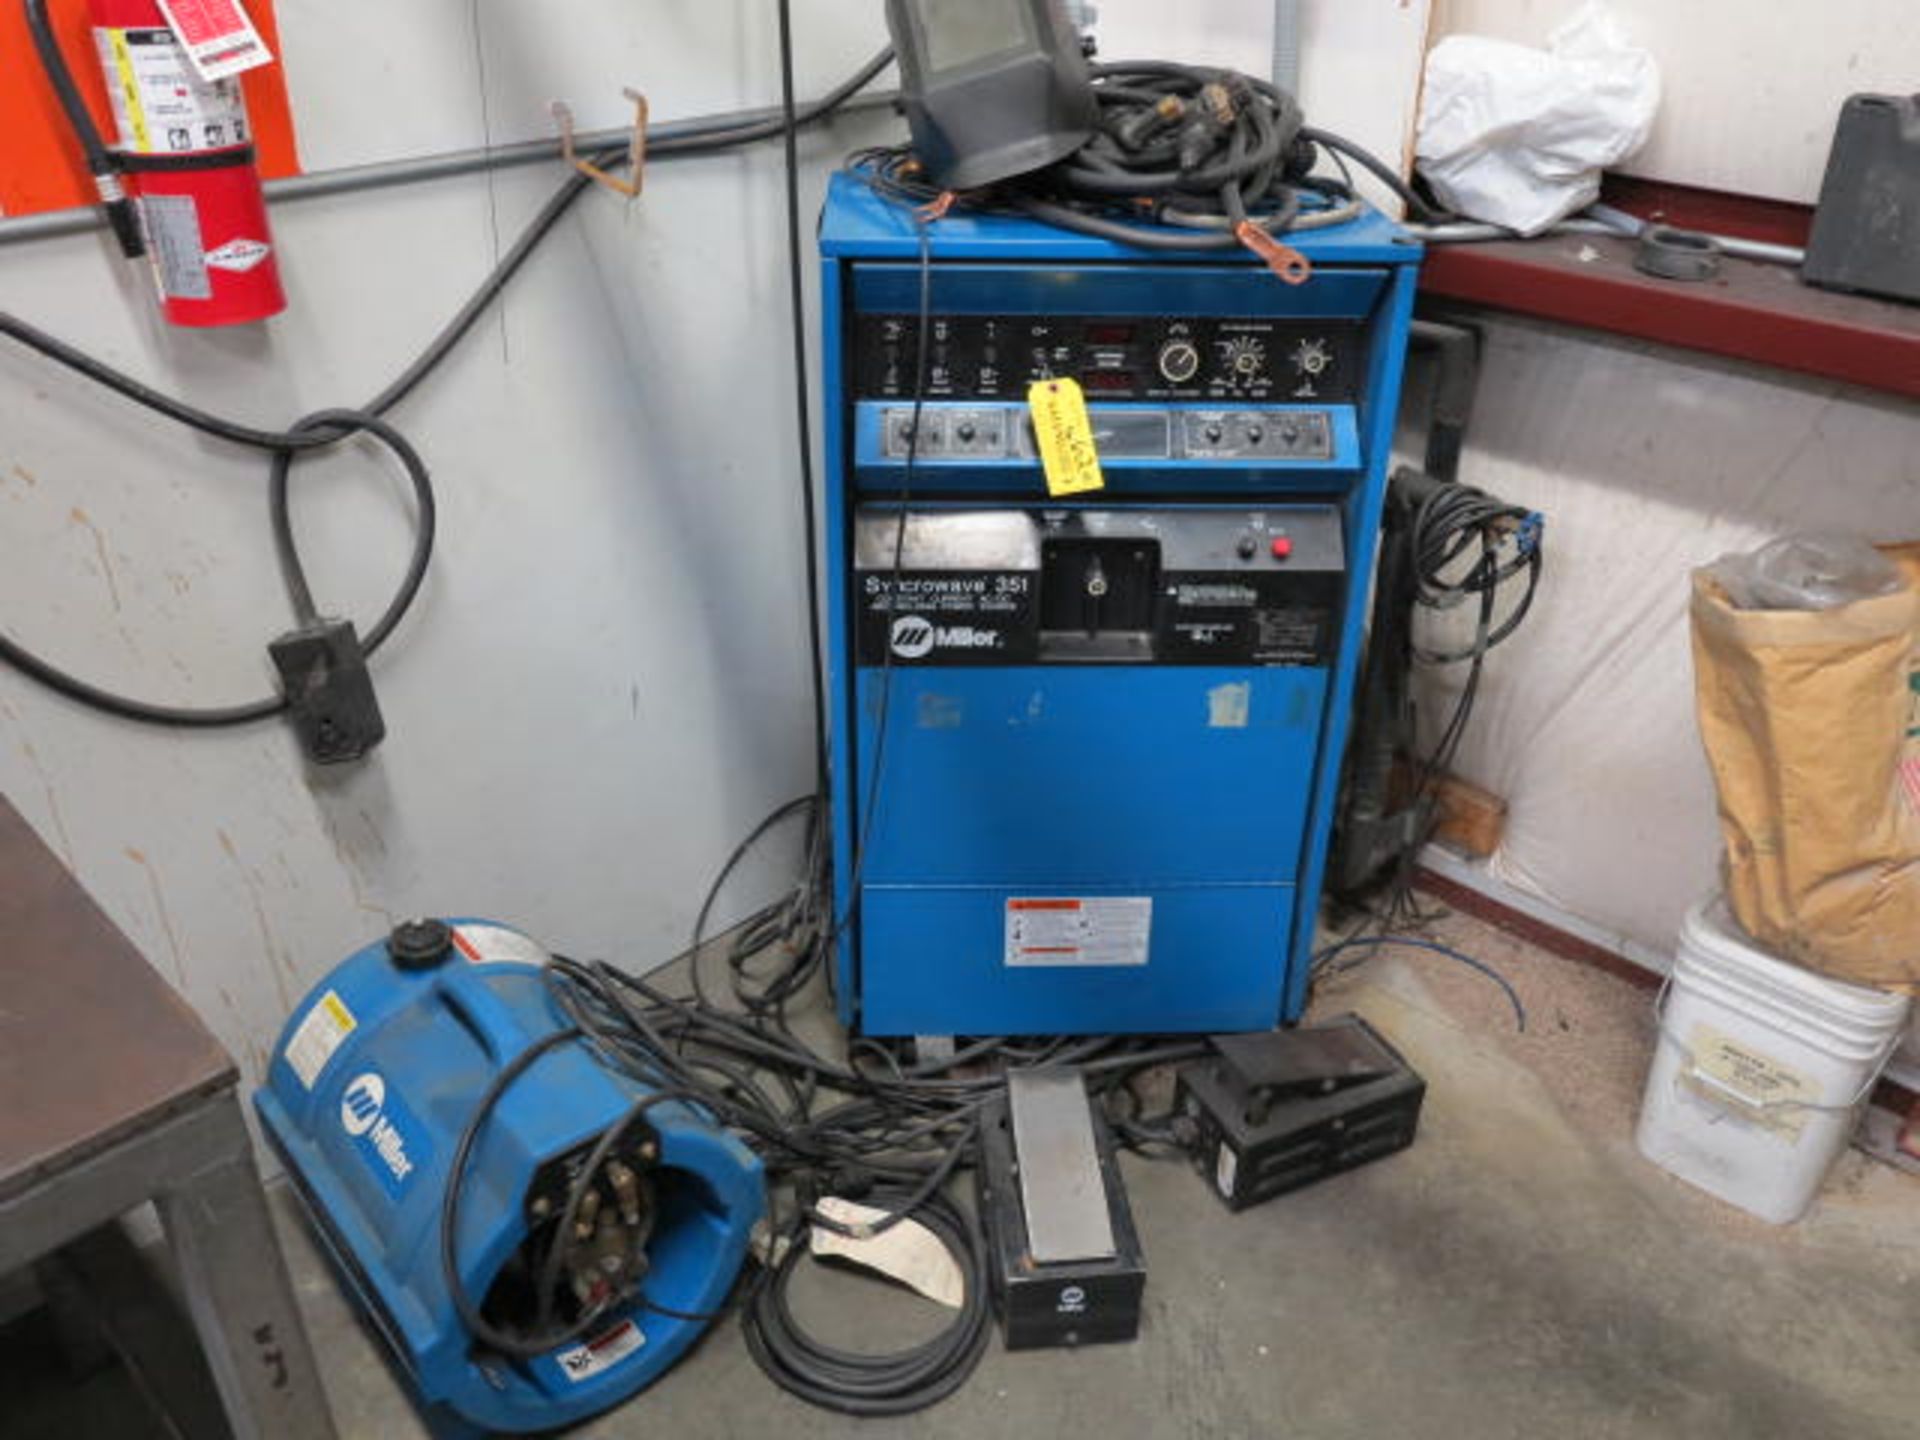 Miller Synchrowave 351 AC/DC Welder S/N KD389441 with Miller Chiller, Foot Pedals, Leads and Guns